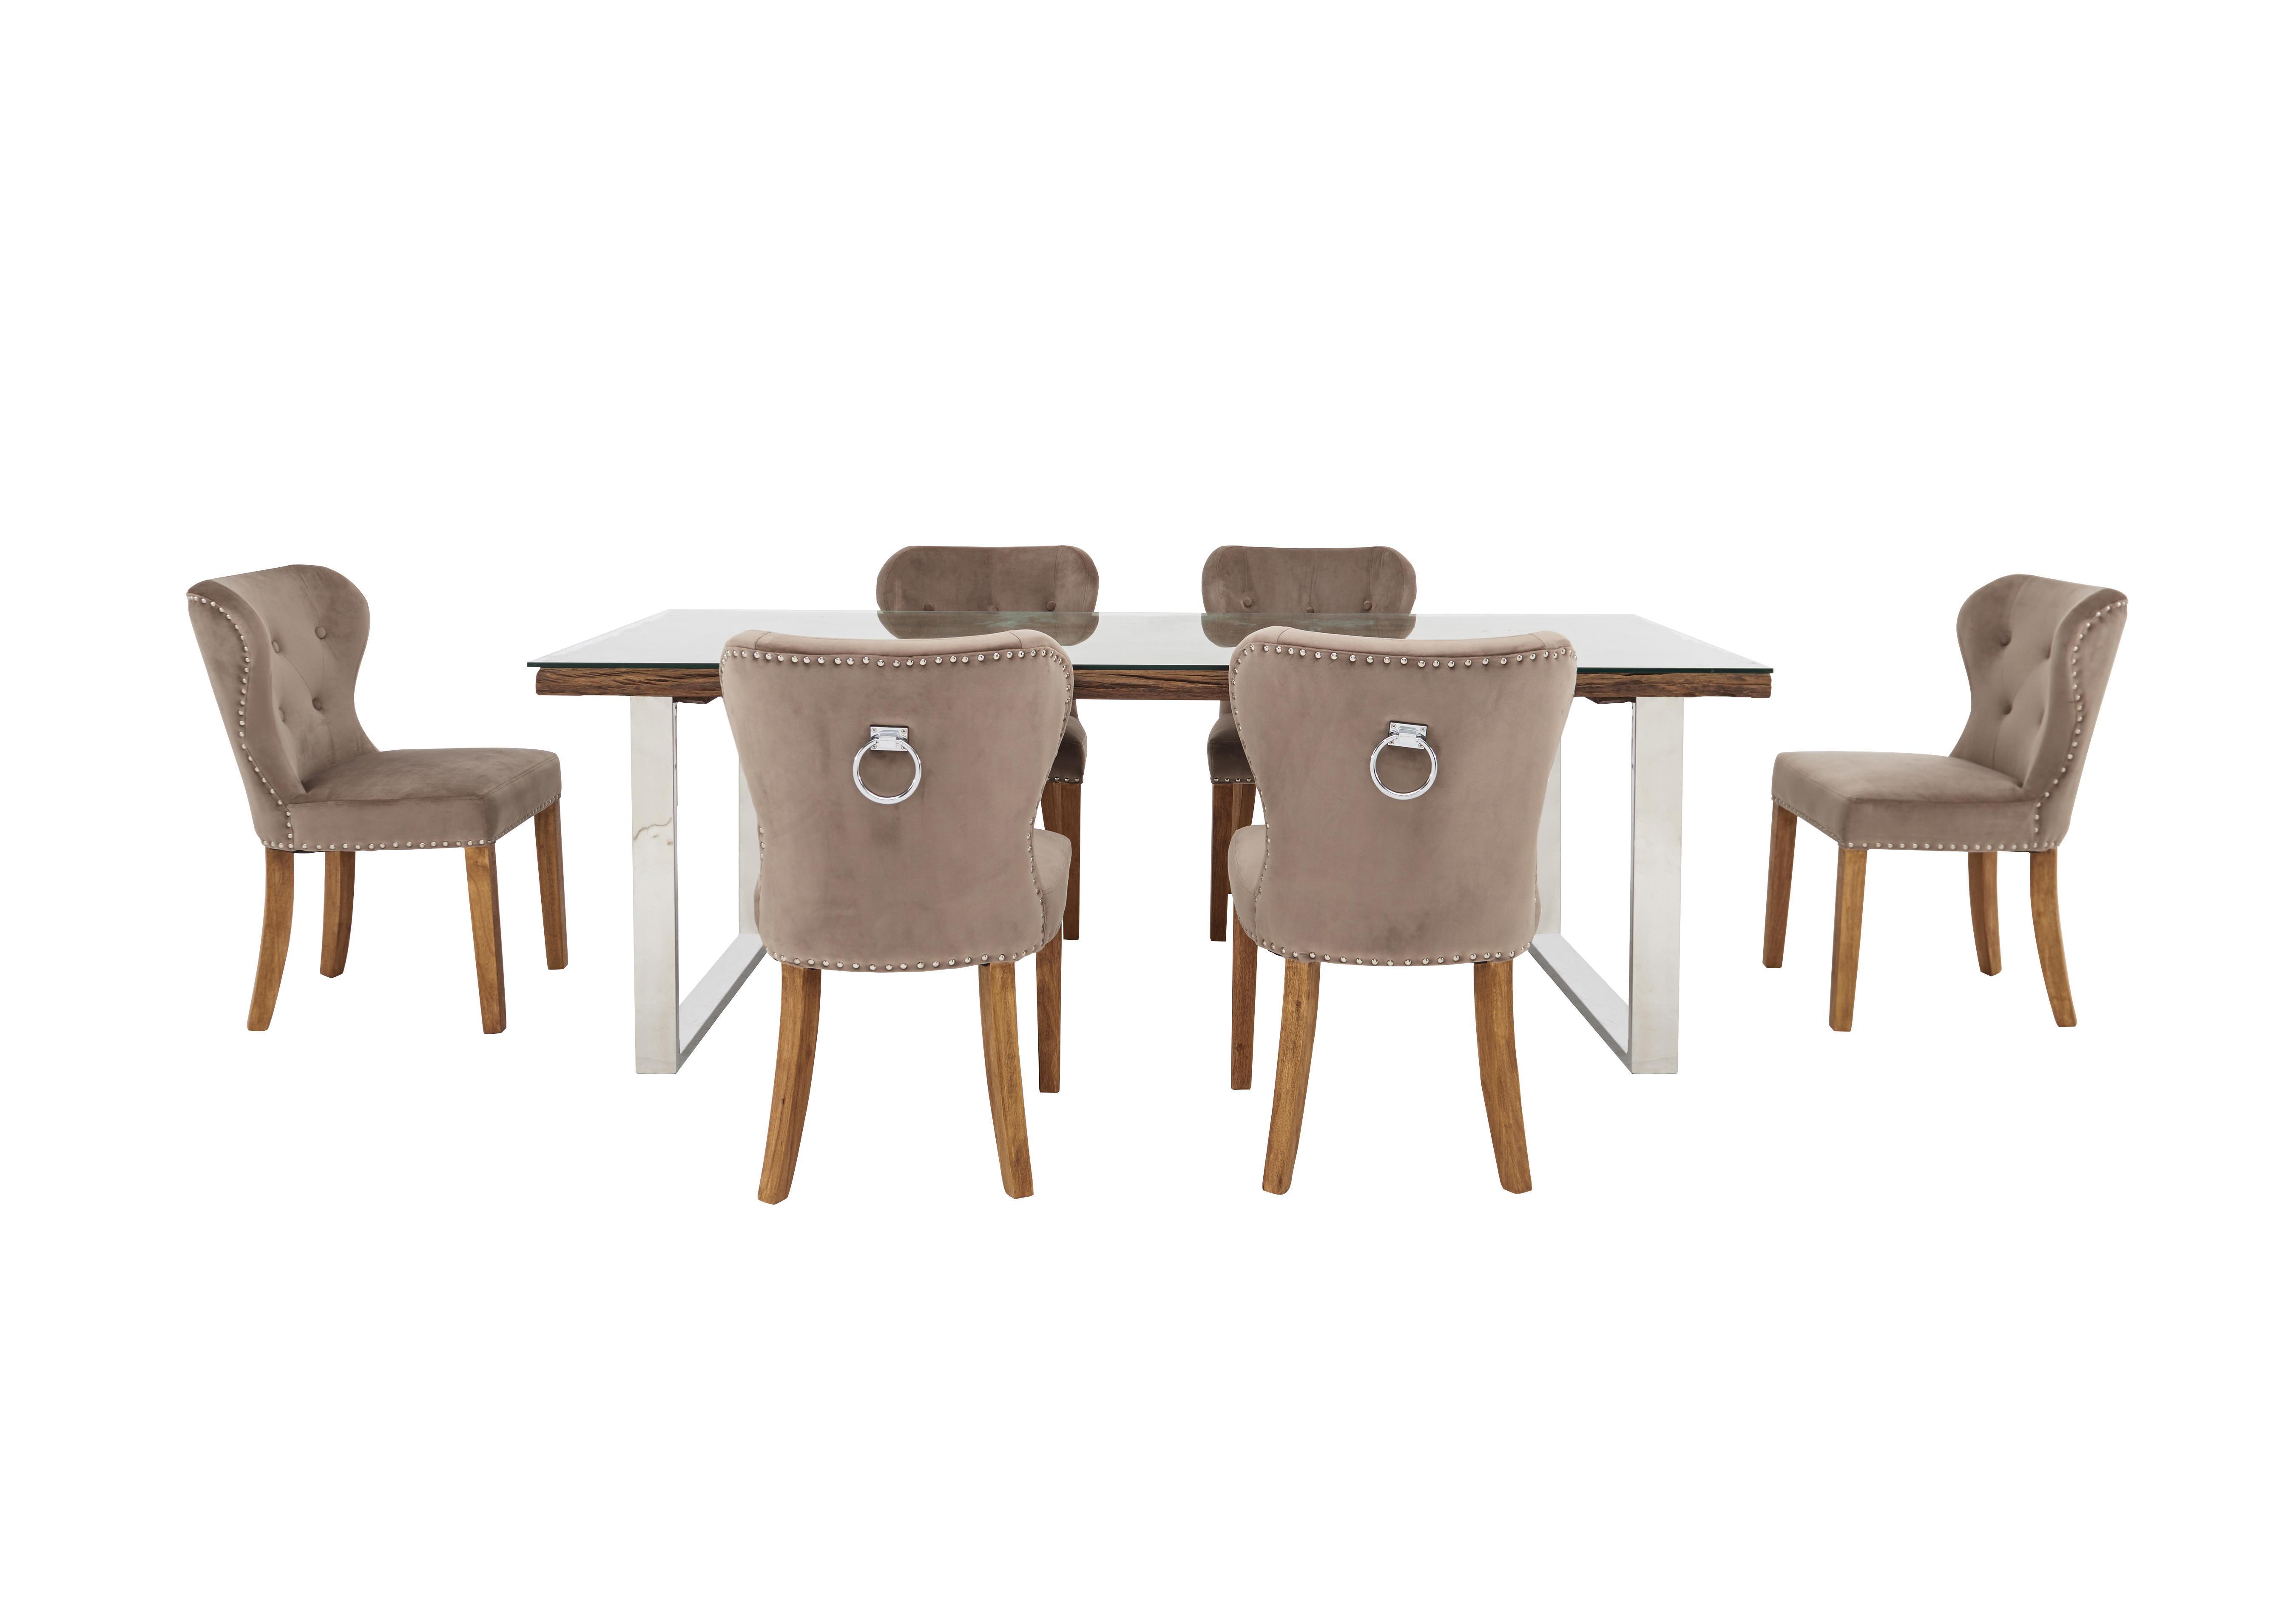 Chennai Dining Table with U-Shaped Legs and 6 Upholstered Chairs in Taupe Chairs on Furniture Village